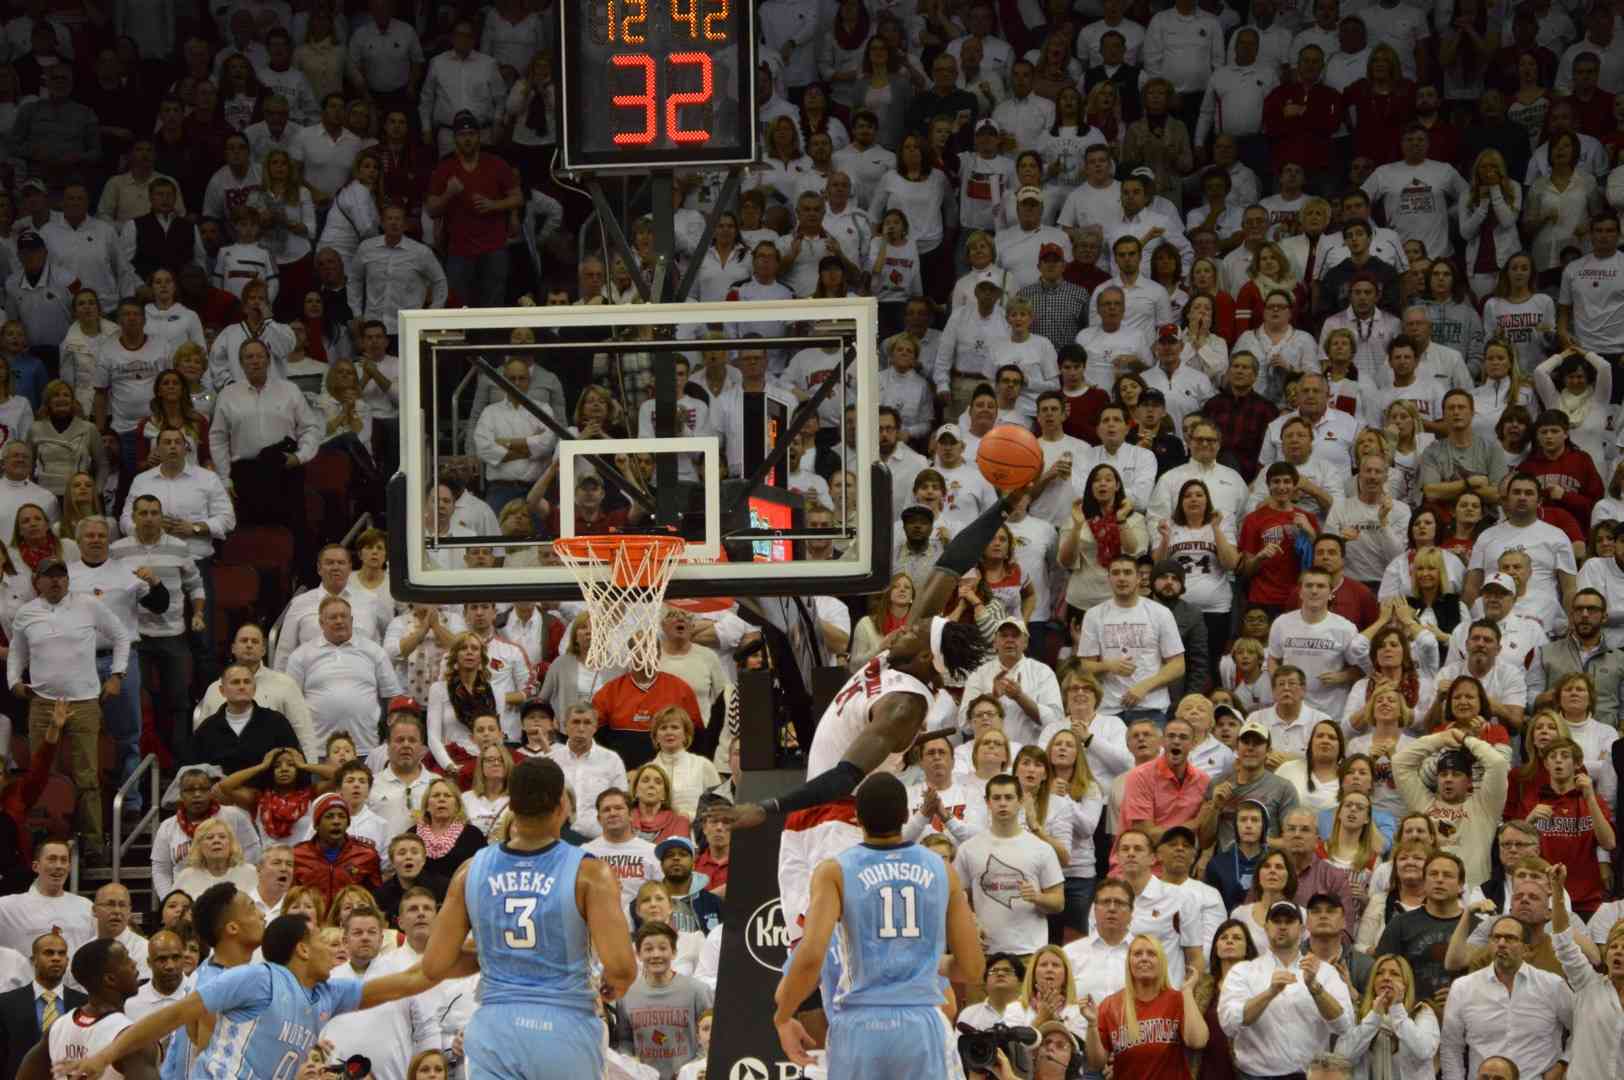 Montrezl Harrell Alley Oop Dunk Louisville vs. North Carolina 1-31-2015 Photo by Seth Bloom